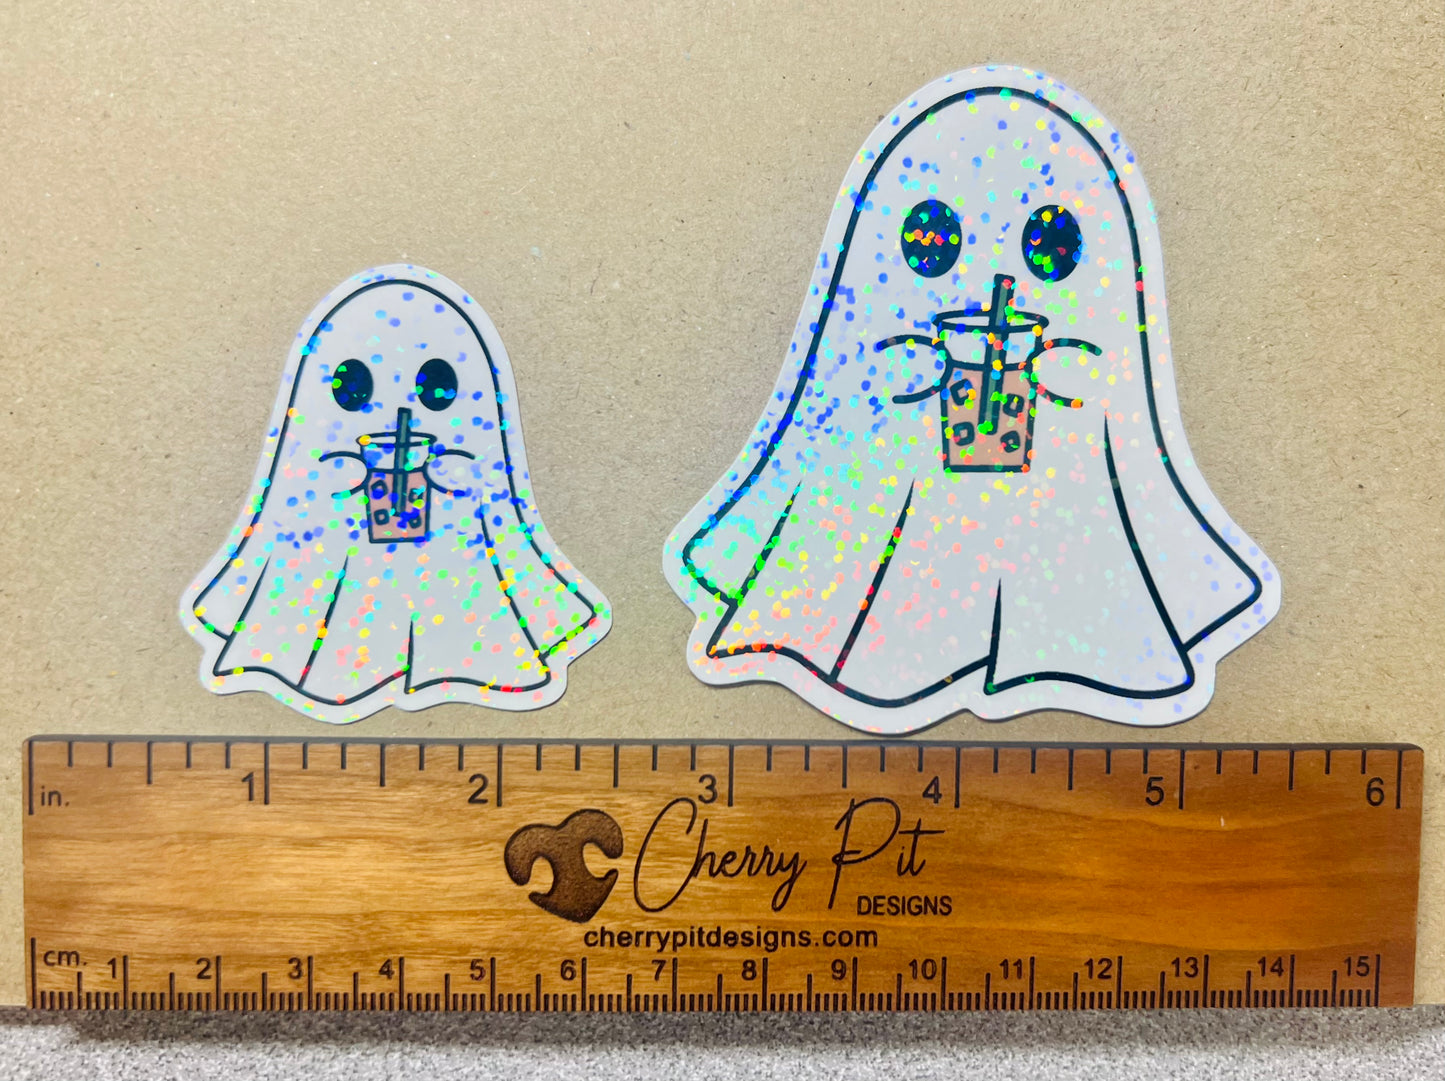 Iced Coffee Ghost Sticker - Holographic